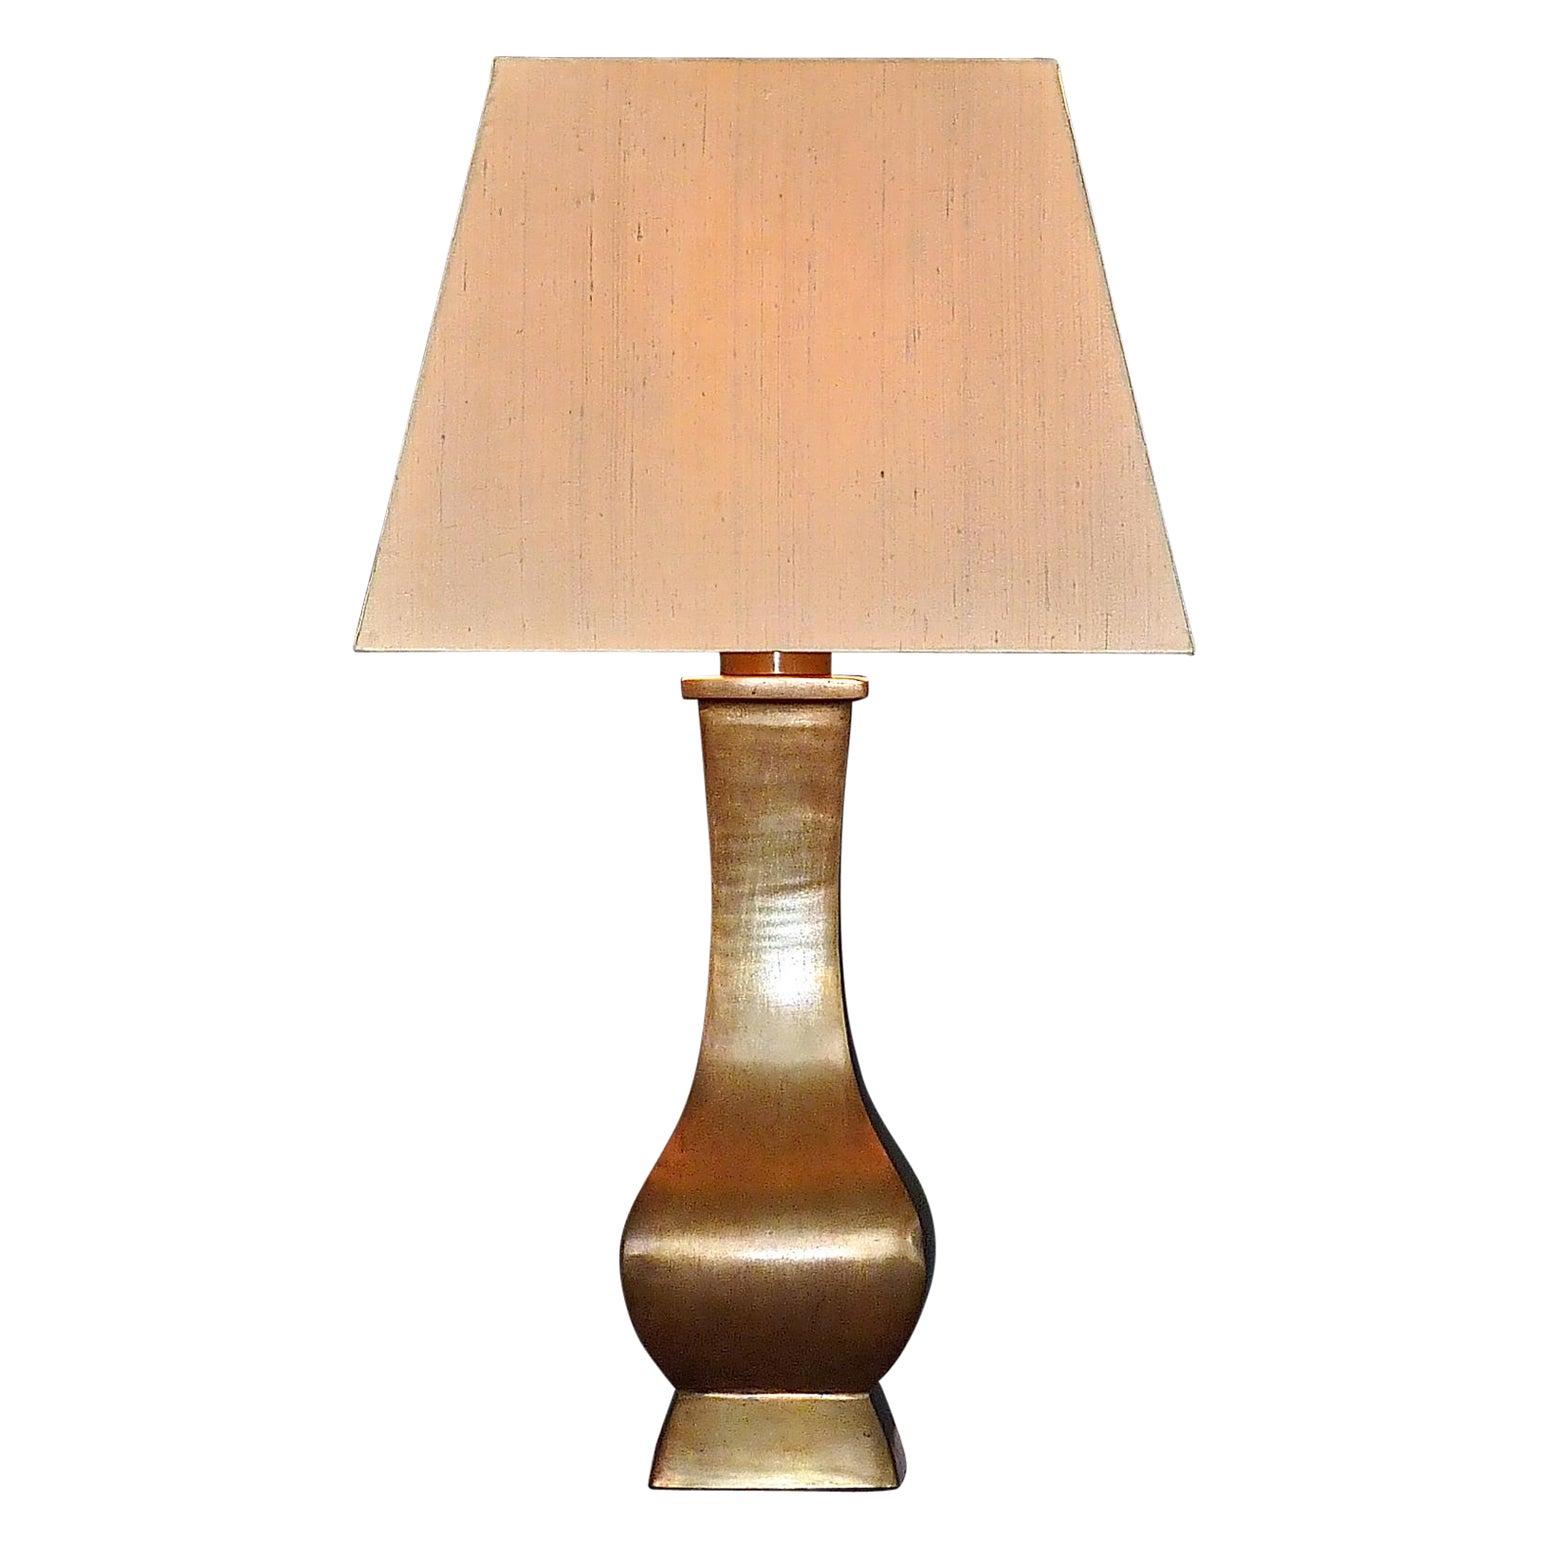 Huge Patinated Bronze Table Lamp Pergay Crespi Maison Jansen Style France 1970s For Sale